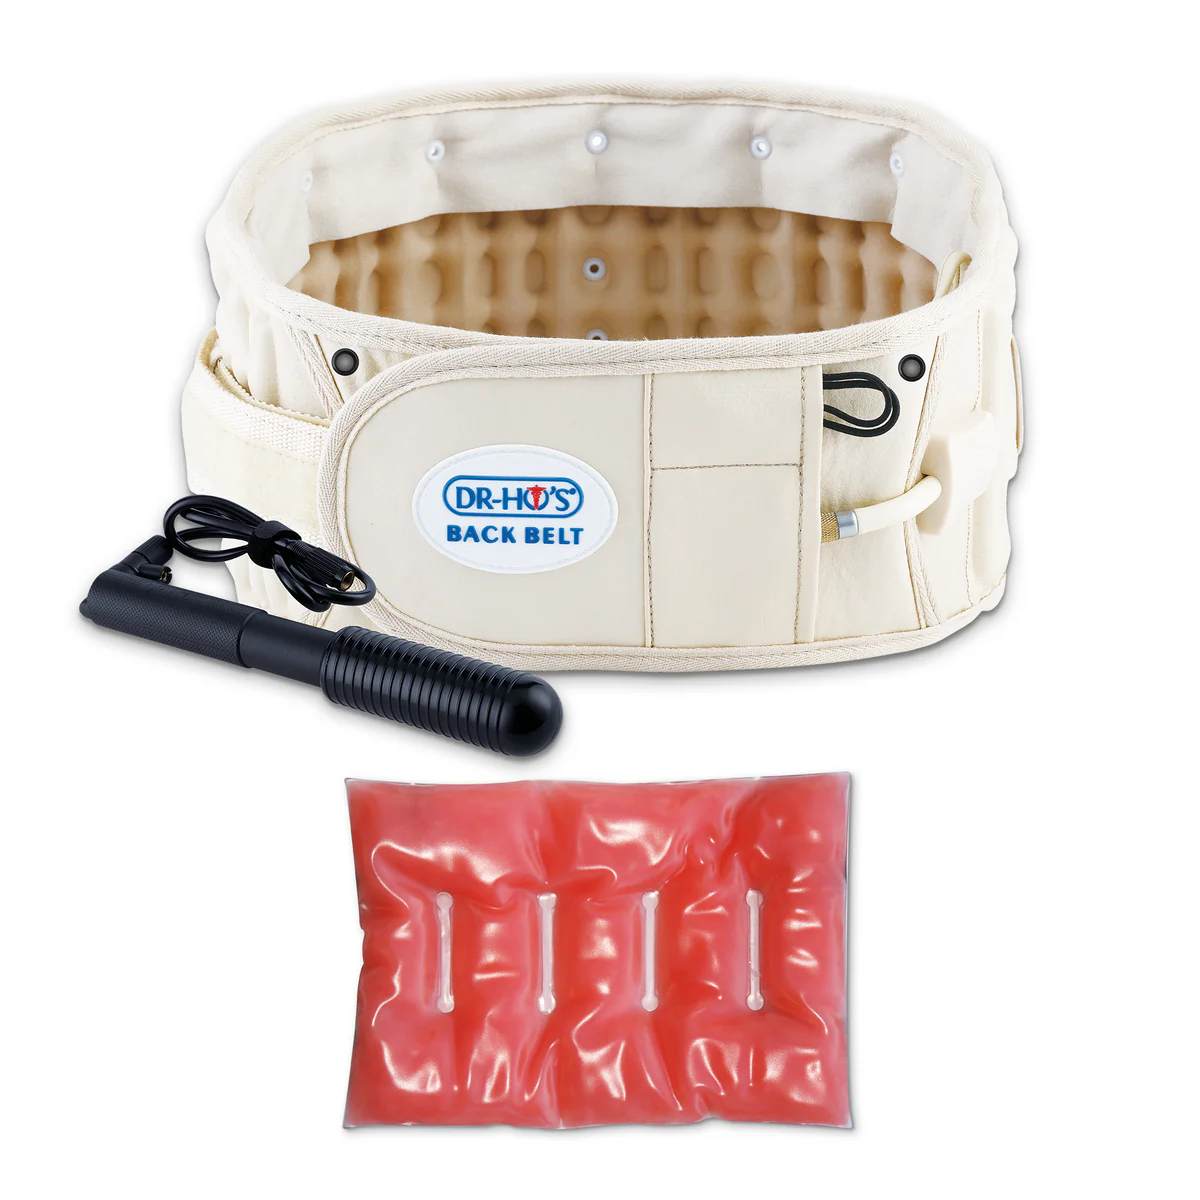 DR- HO'S 2-in-1 Back Relief Decompression Belt - Essentials Package (42-55 Inches)